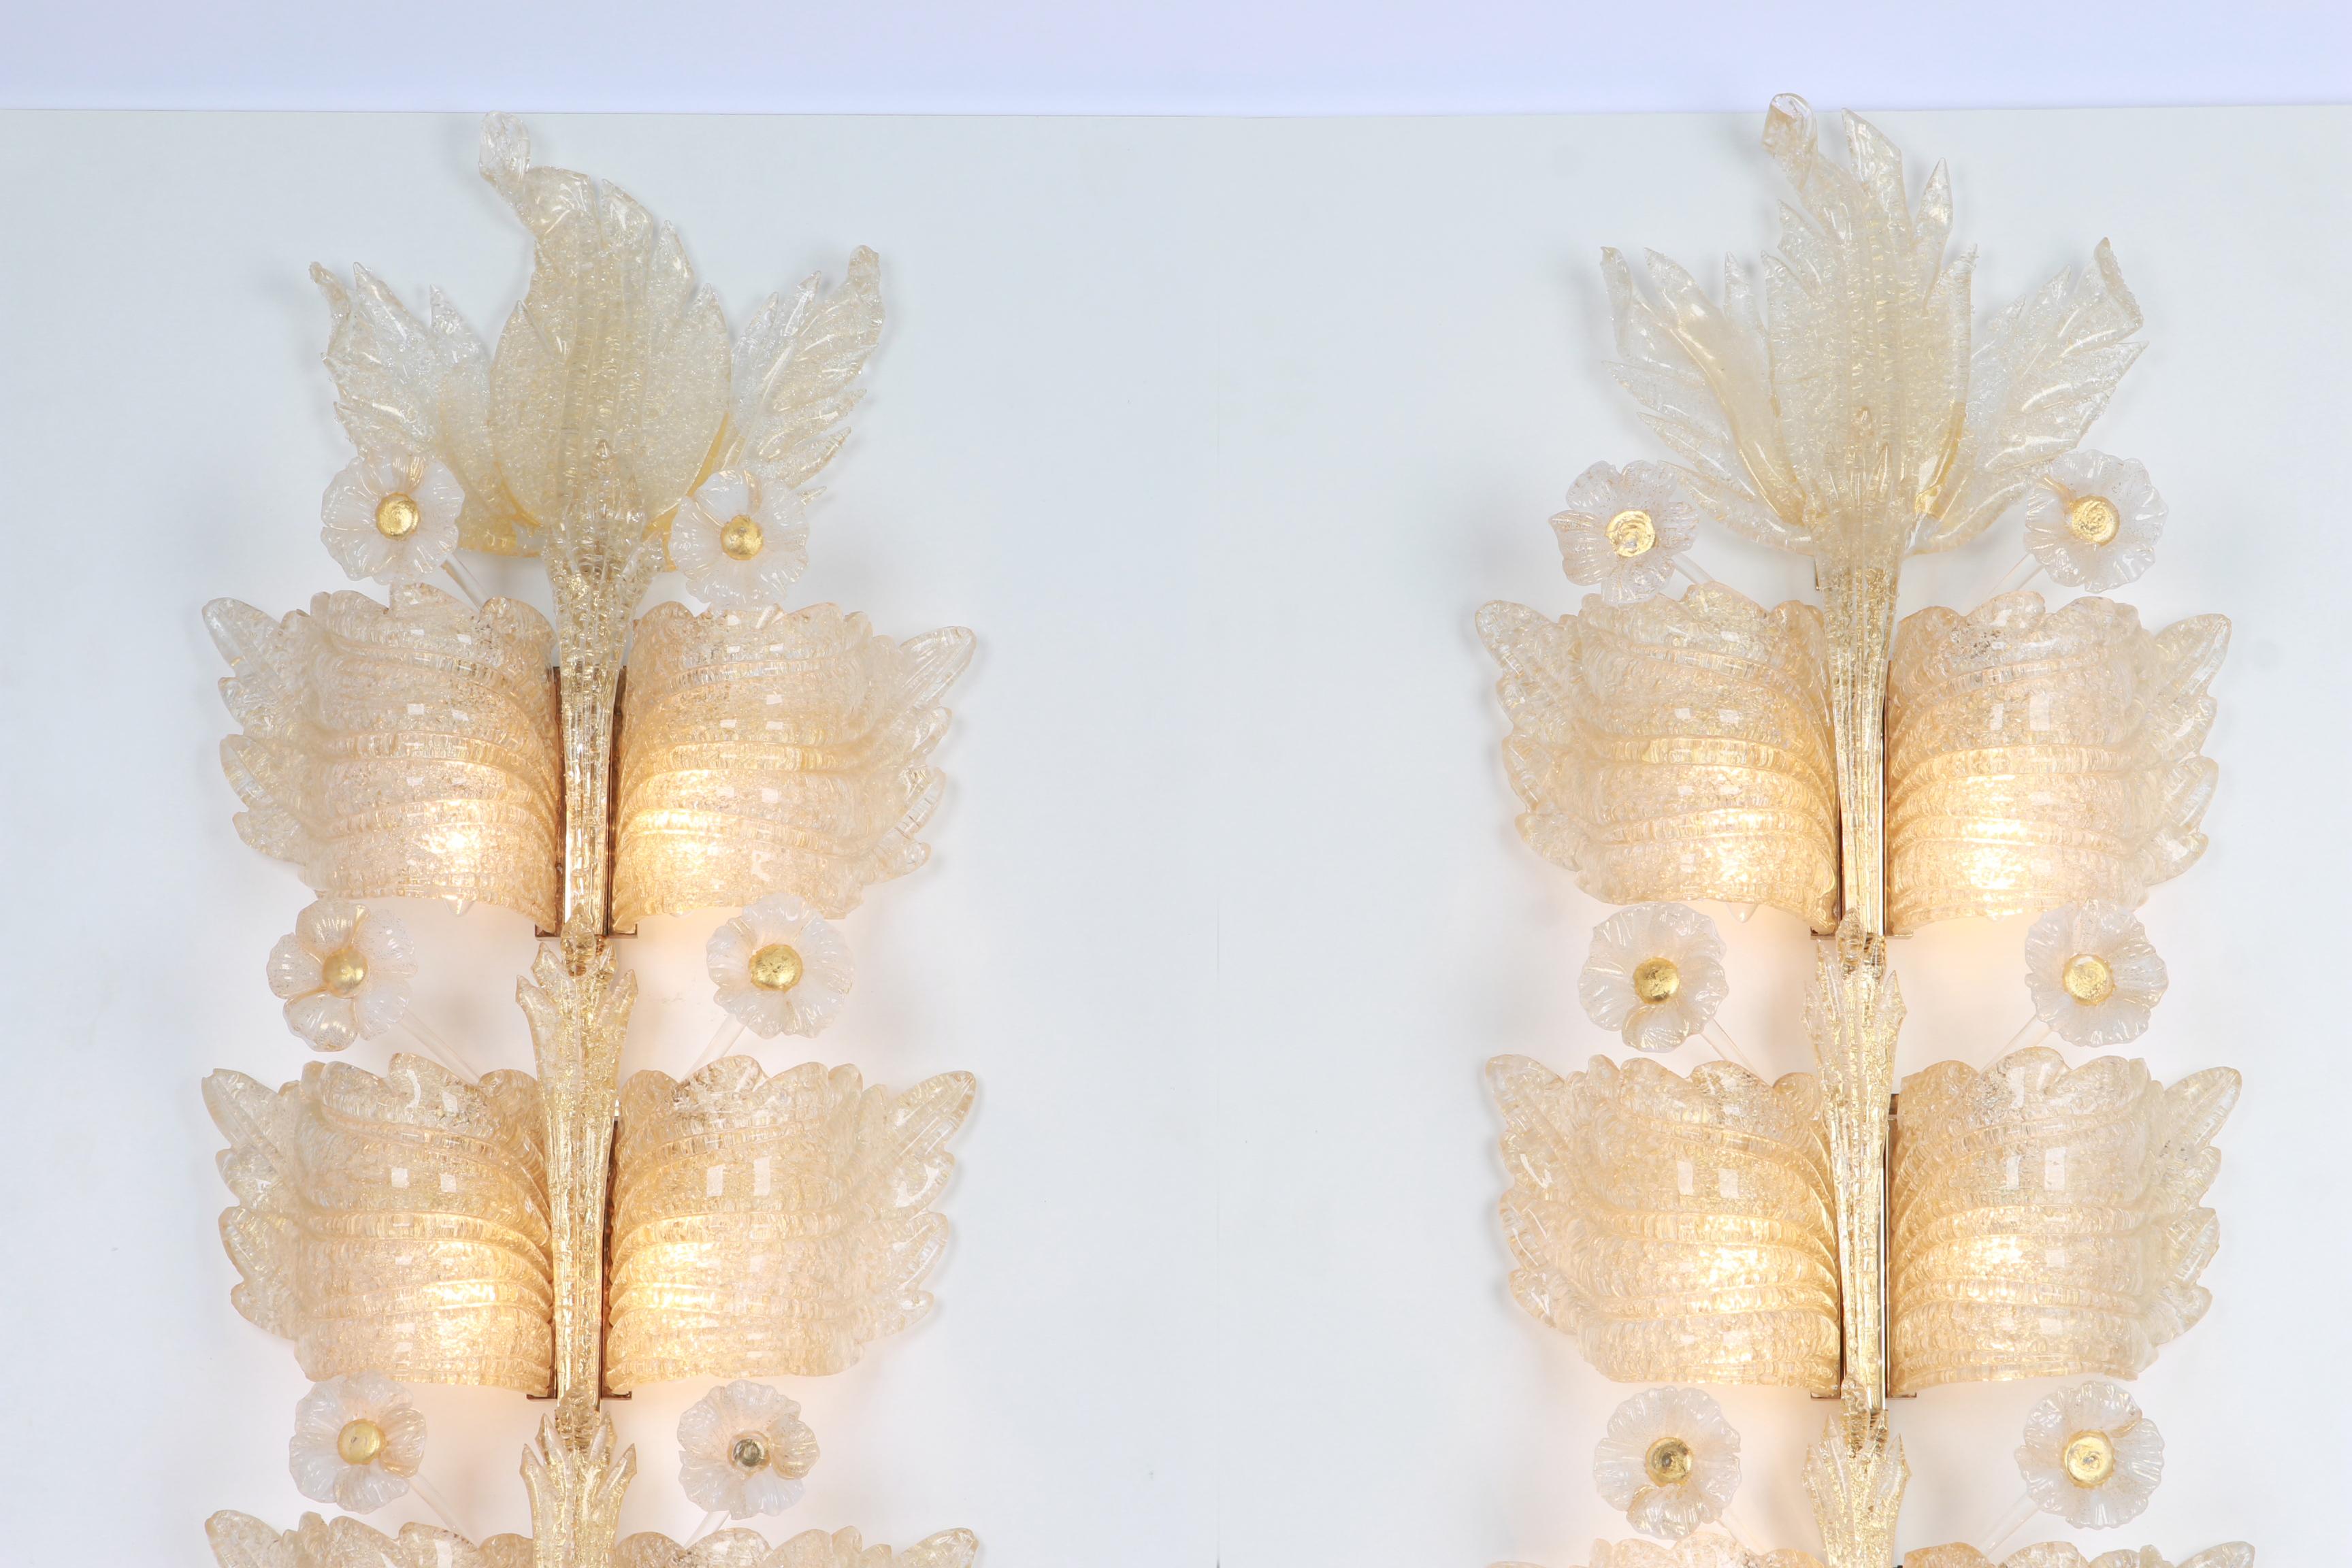 A gorgeous set of 2 sconces with 24-karat gold made by Barovier & Toso, Italy, circa 1970-1979.
High quality, Hand made, and in very good condition. Cleaned, well-wired, and ready to use.

Each sconce requires 6 x E14 standard bulbs with 60 W